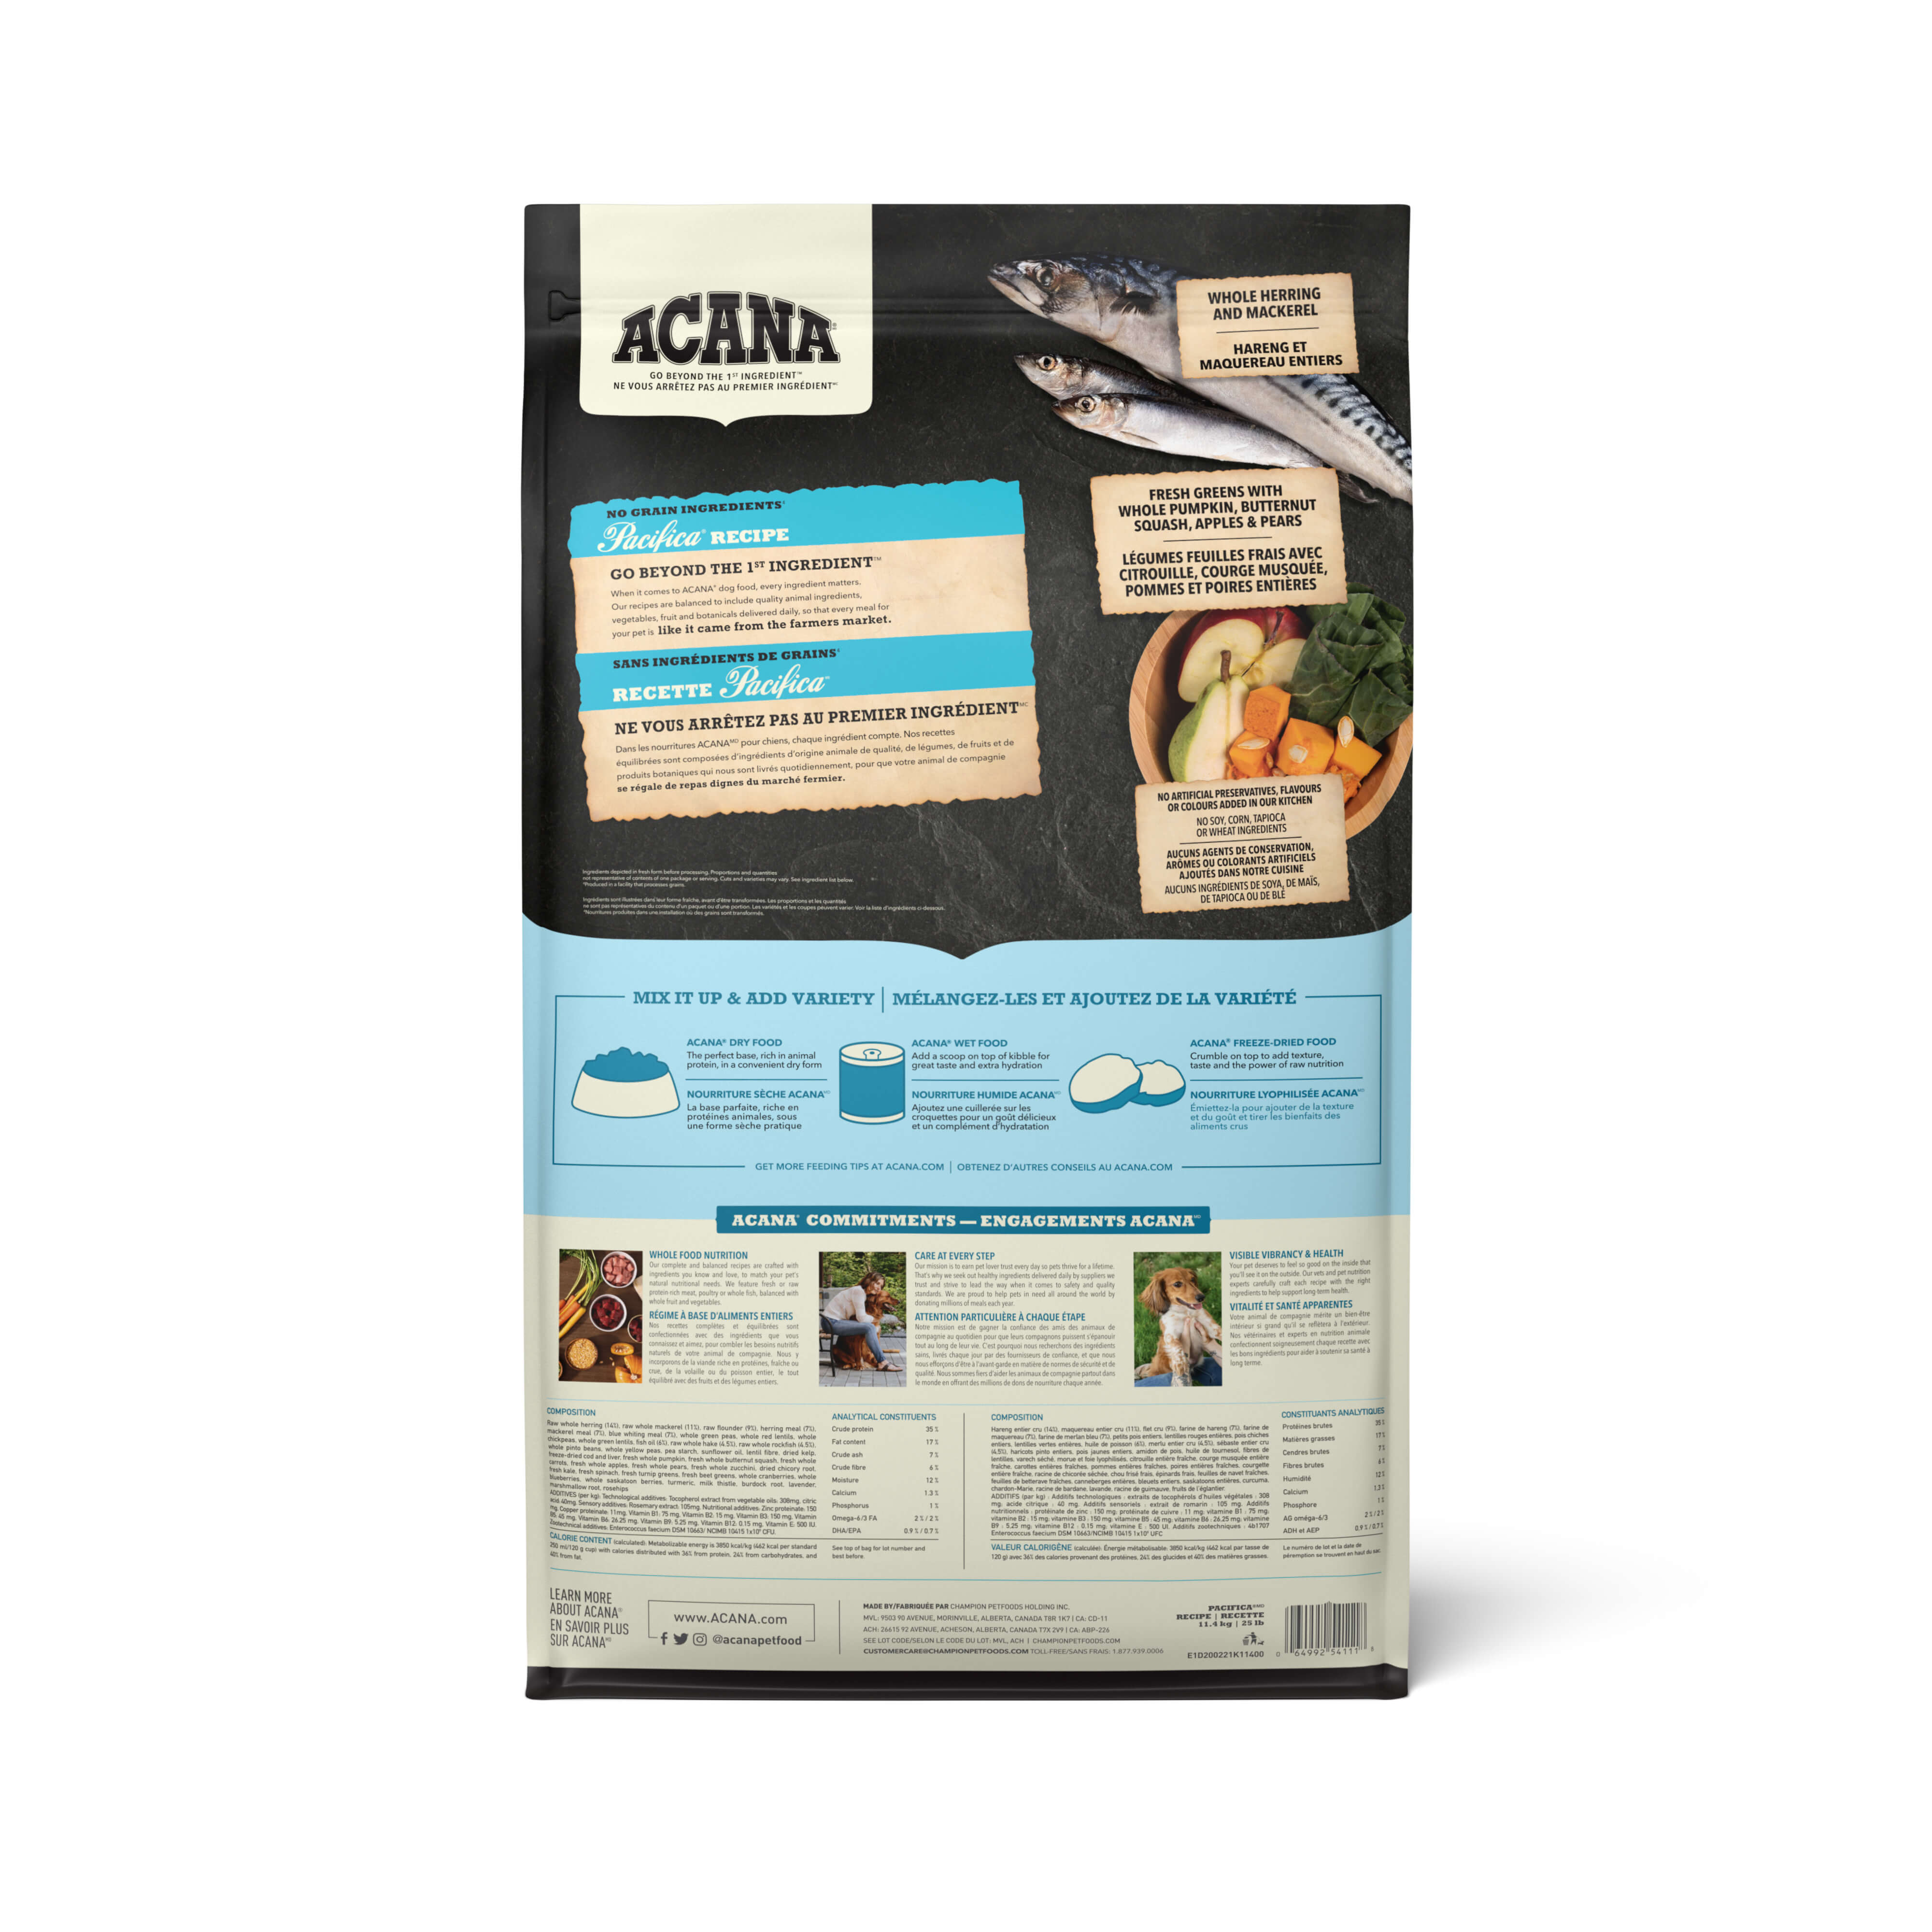 Acana - Highest Protein - Pacifica (Dry Dog Food)